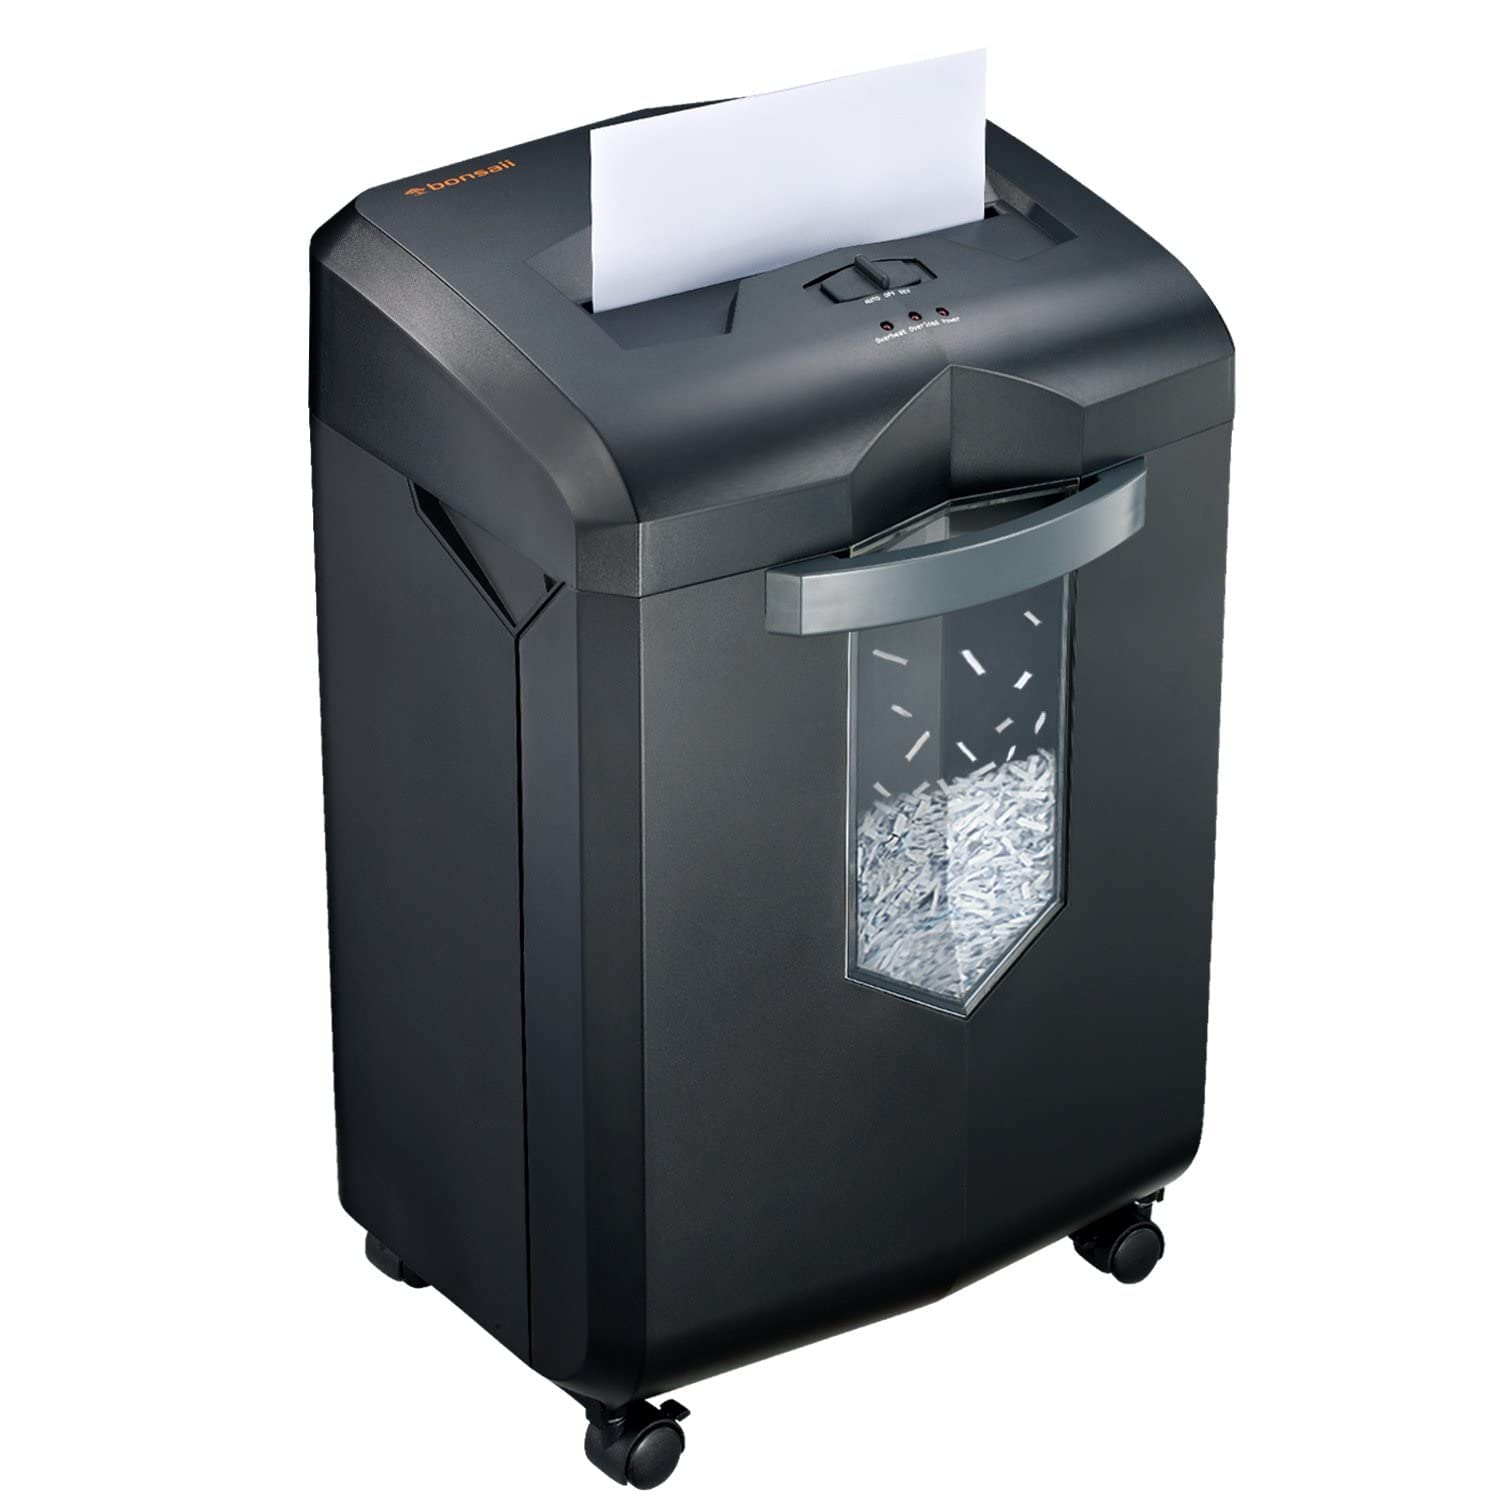  bonsaii Paper Shredder, 18-Sheet 60-Minutes Paper Shredder for Office Heavy Duty Cross-Cut Shredder with 6 Gallon Pullout Basket & 4 Casters, Anti-Jam High Security Mail Shredder for Home Use(C149-C)...